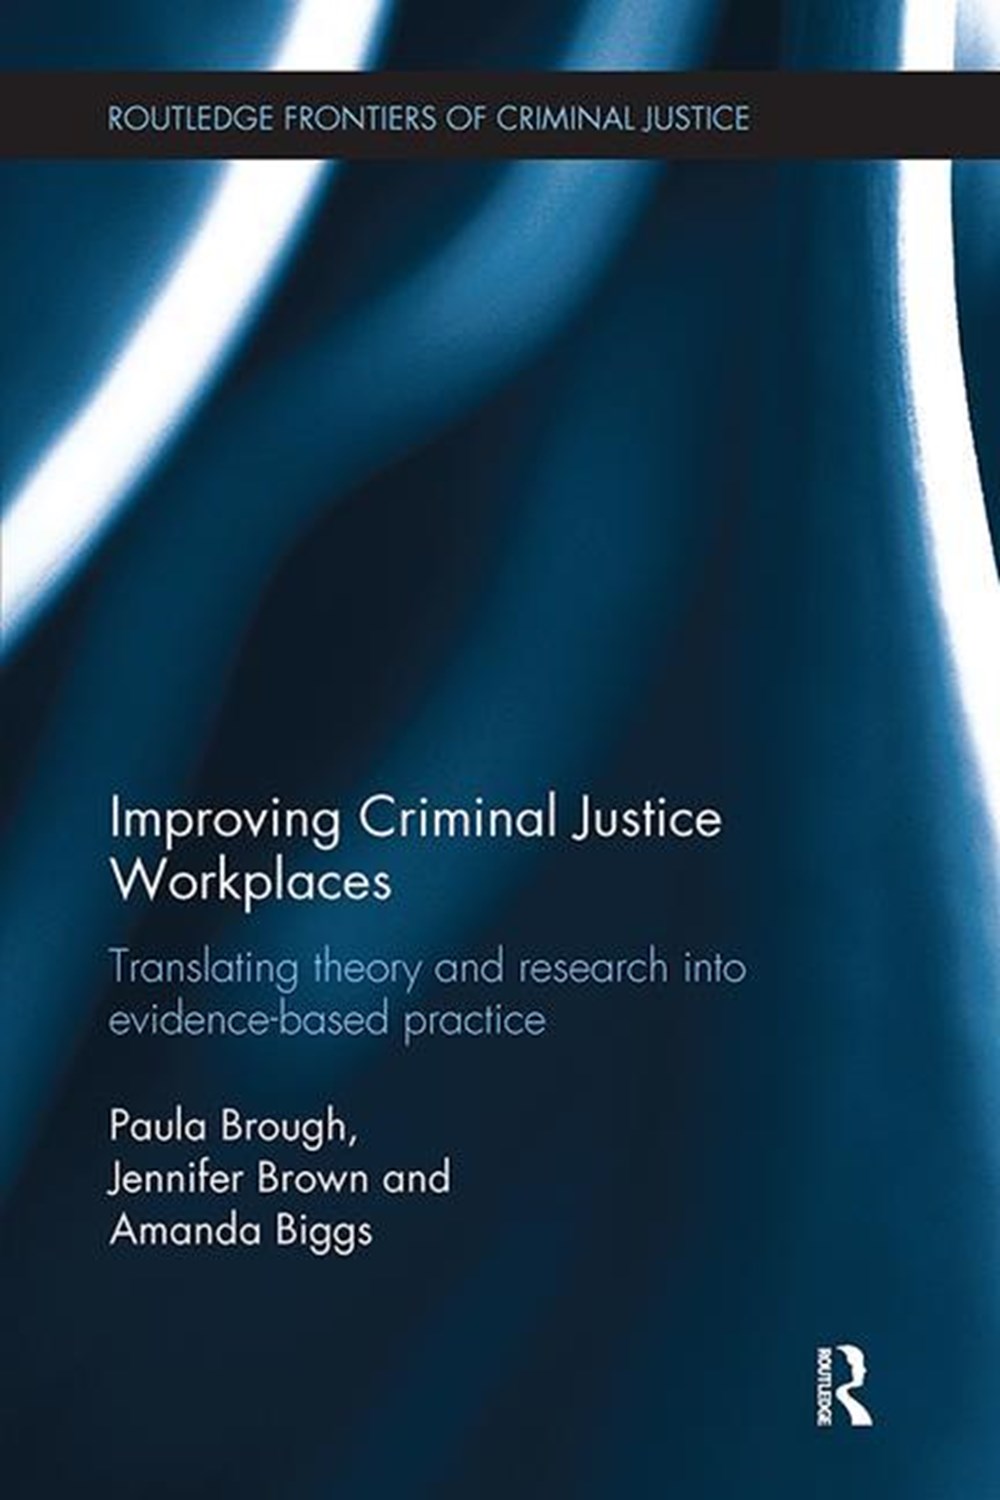 Improving Criminal Justice Workplaces: Translating Theory and Research Into Evidence-Based Practice